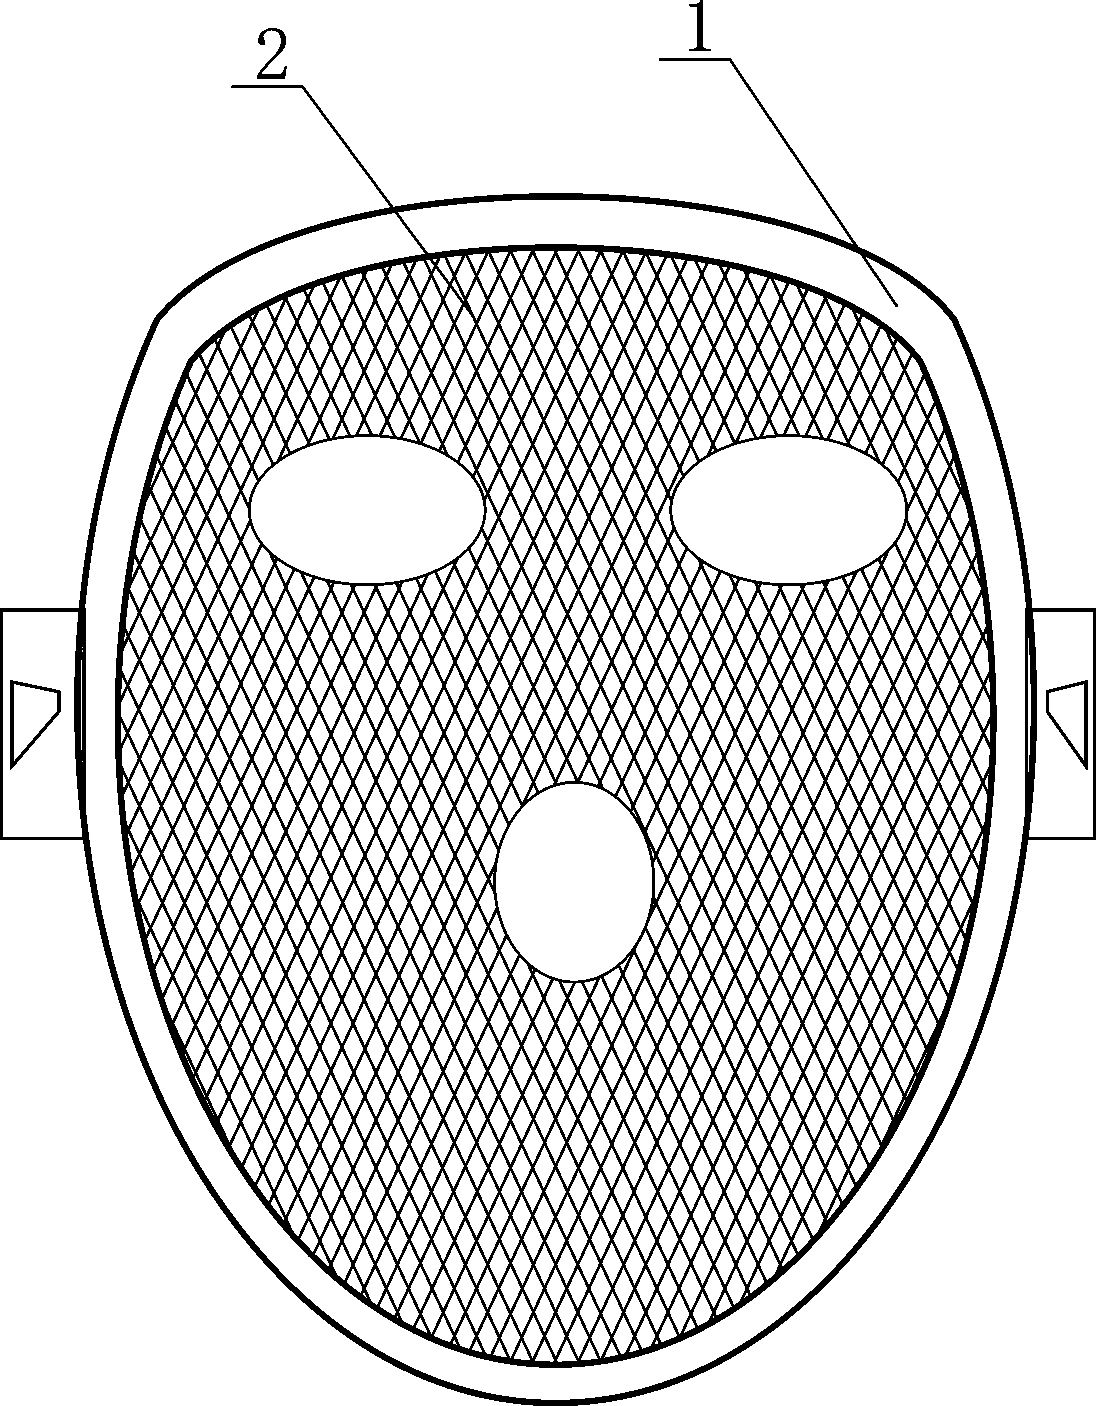 Steam-generating freeze-dried mask